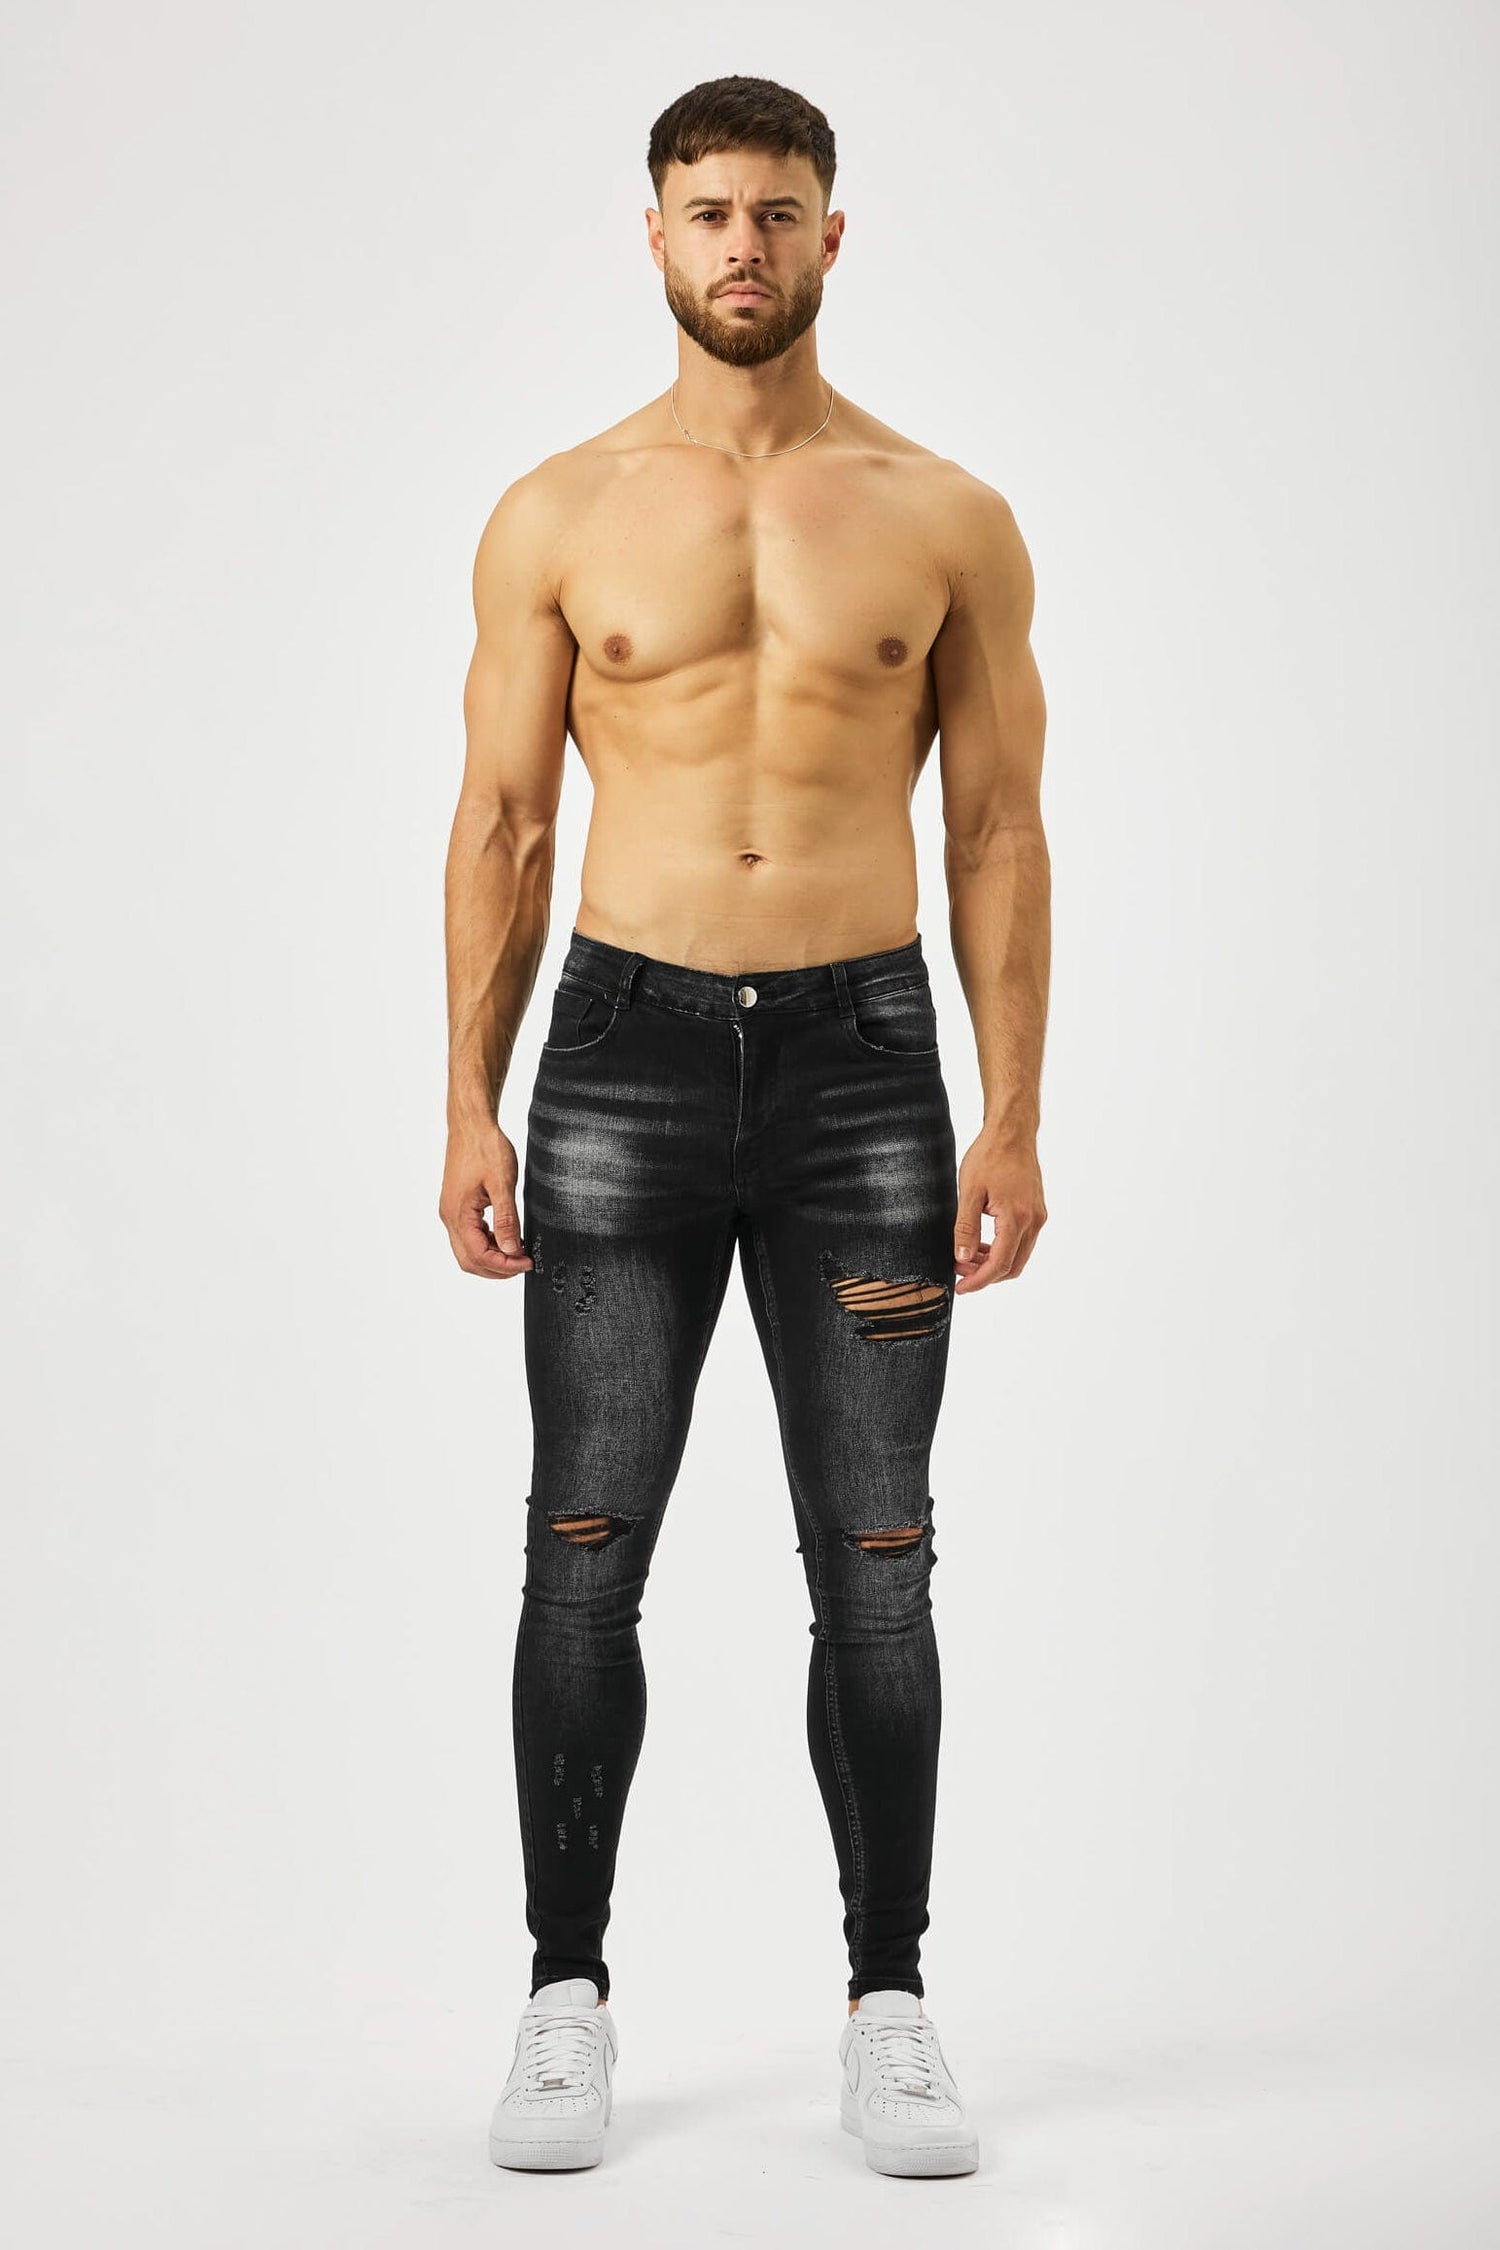 Legend London Jeans - spray on CHARCOAL WASH SPRAY - ON JEANS - MULIT RIP